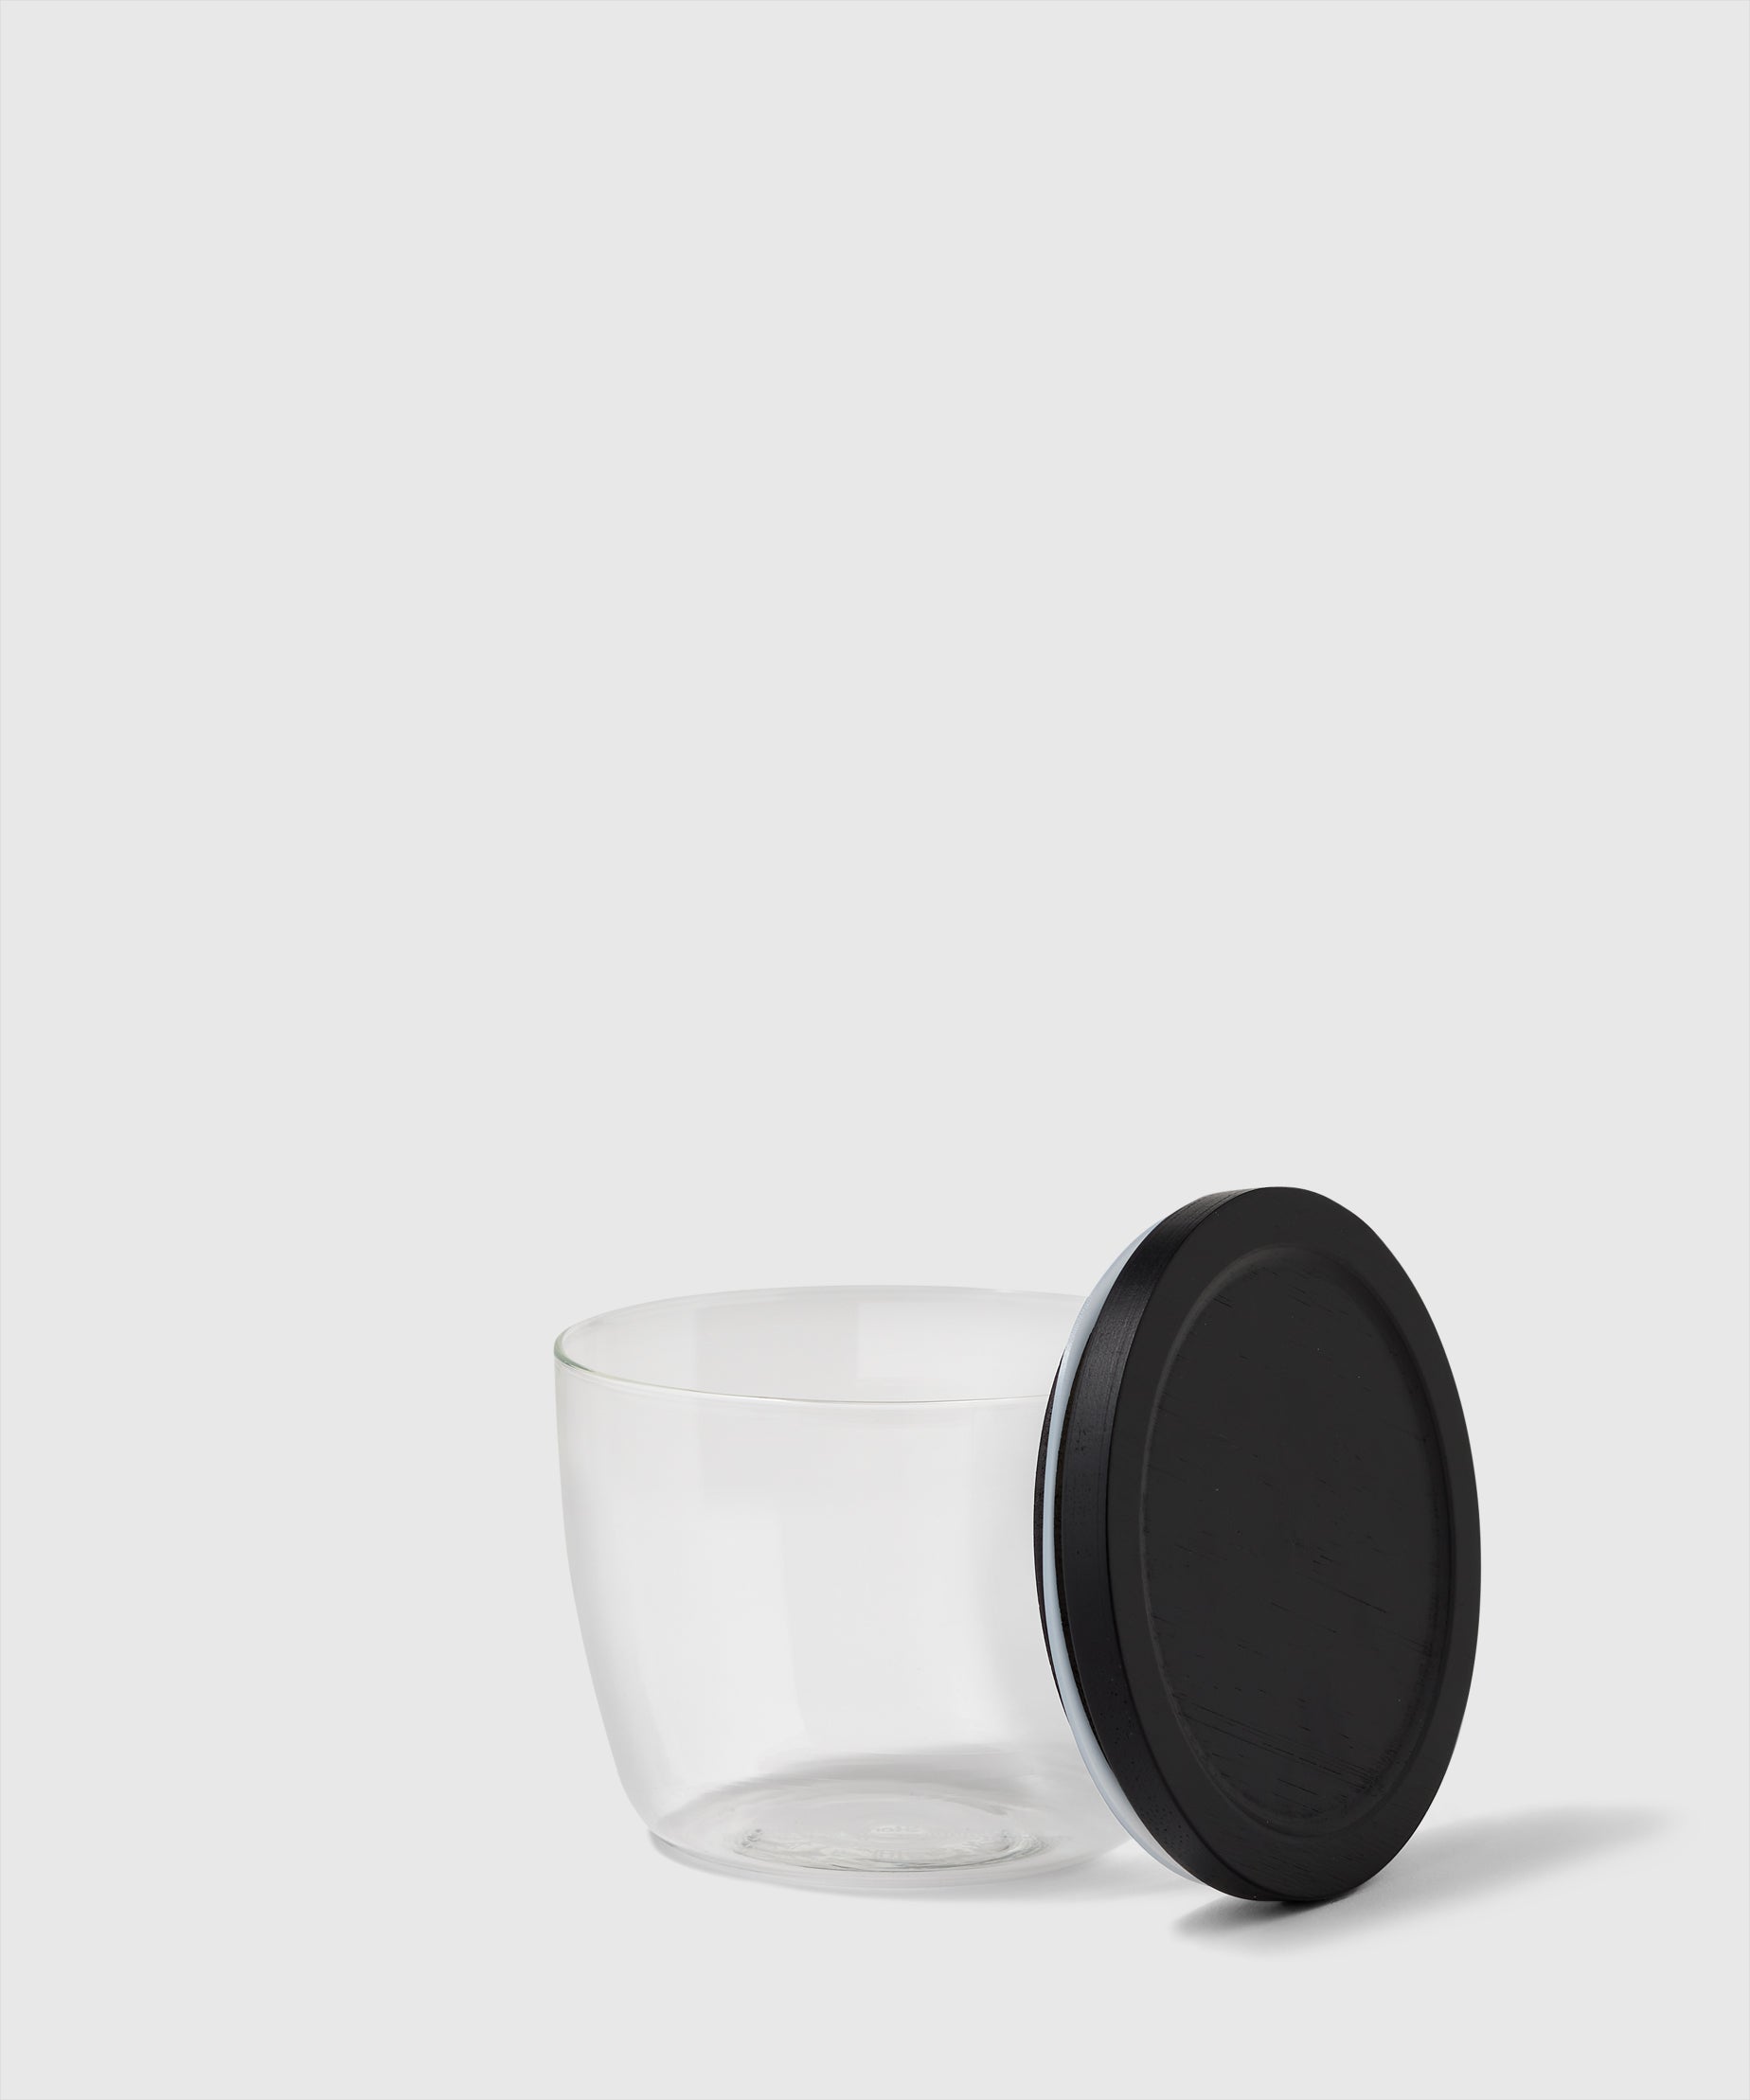 Small Modular Glass Canister, Black | The Container Store x KonMari